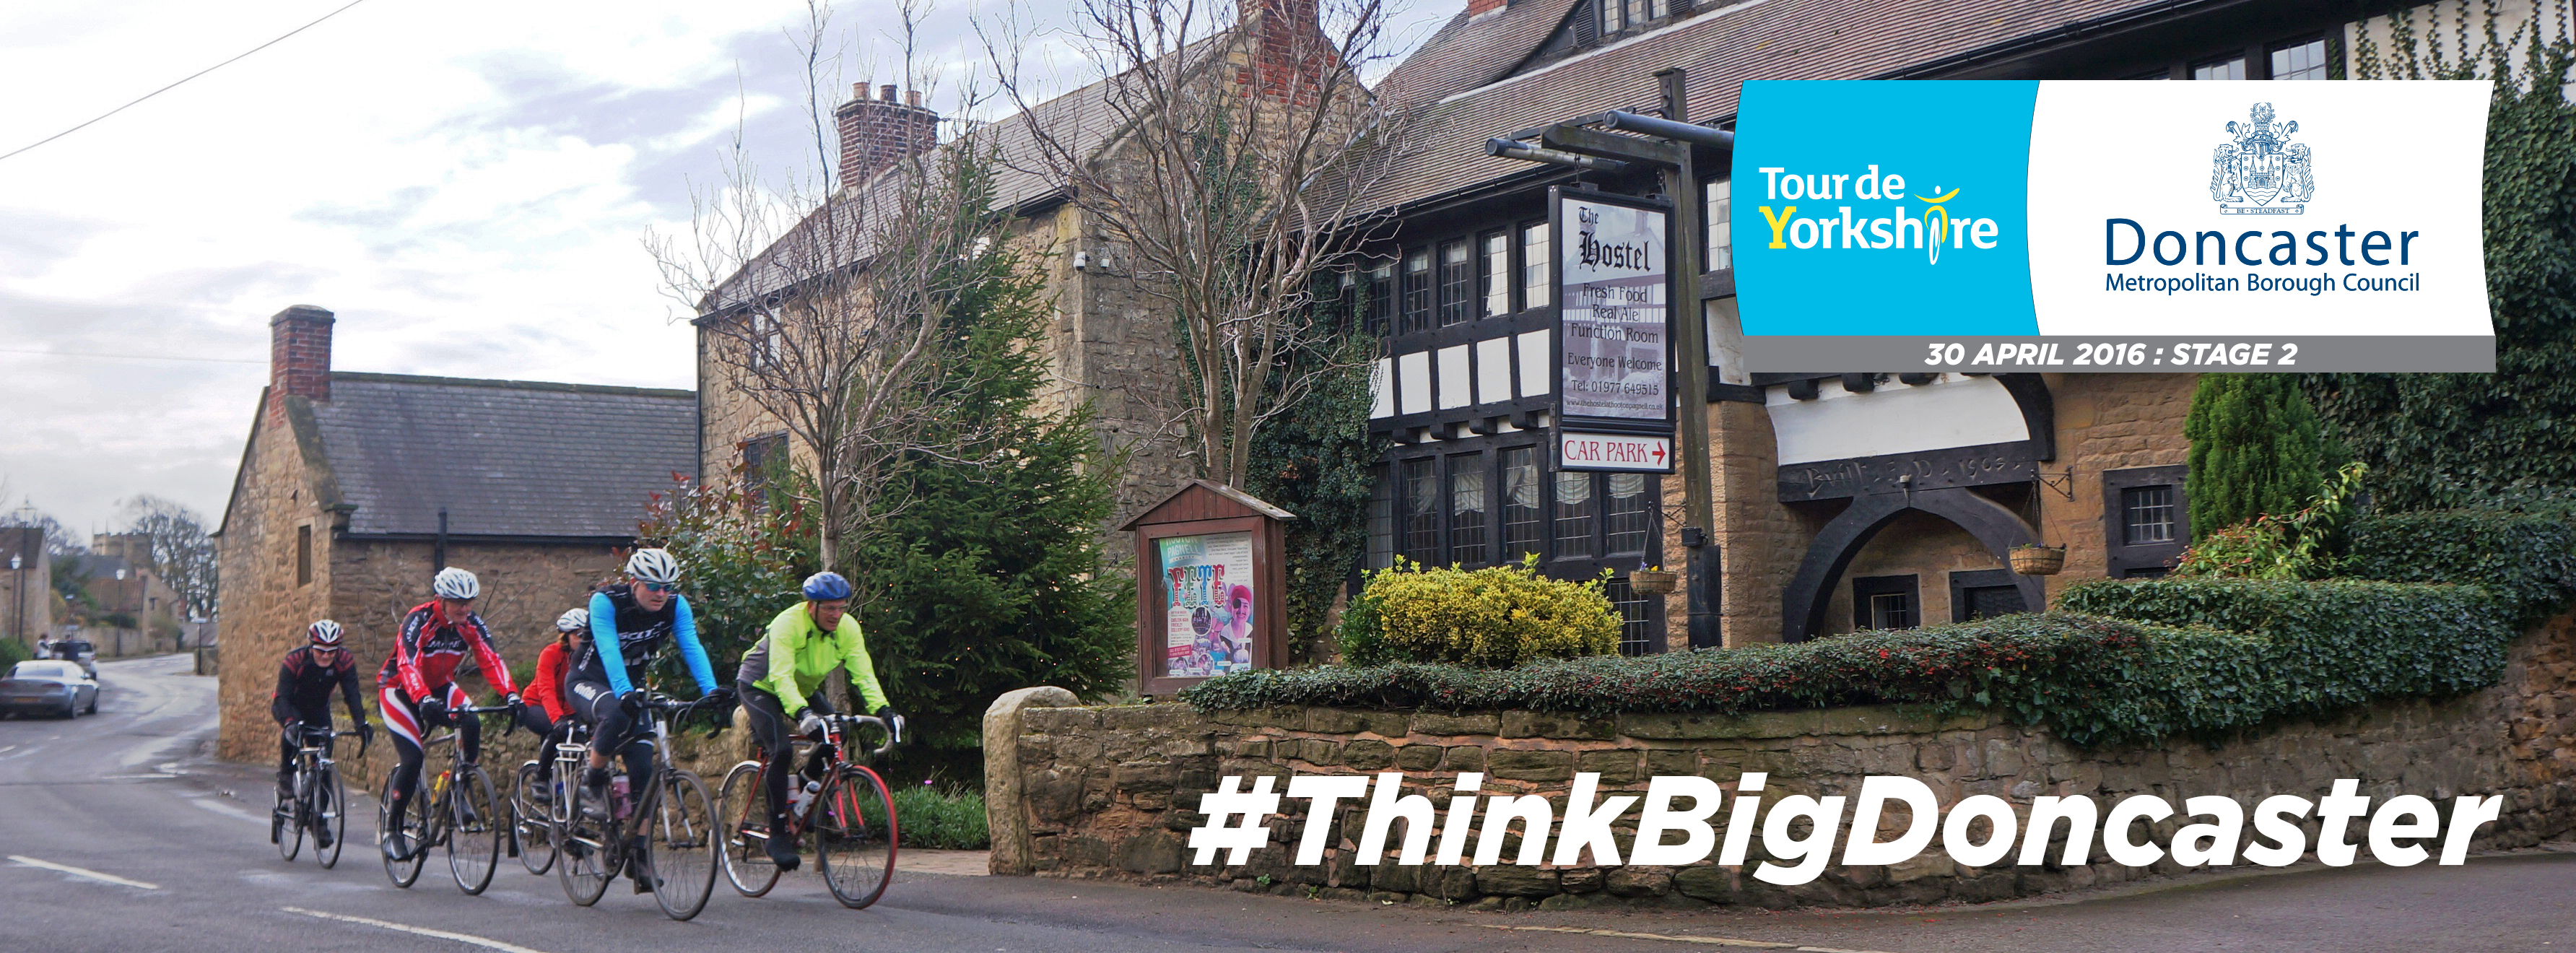 Bike riders travelling through Hooton Pagnell. #ThinkBigDoncaster